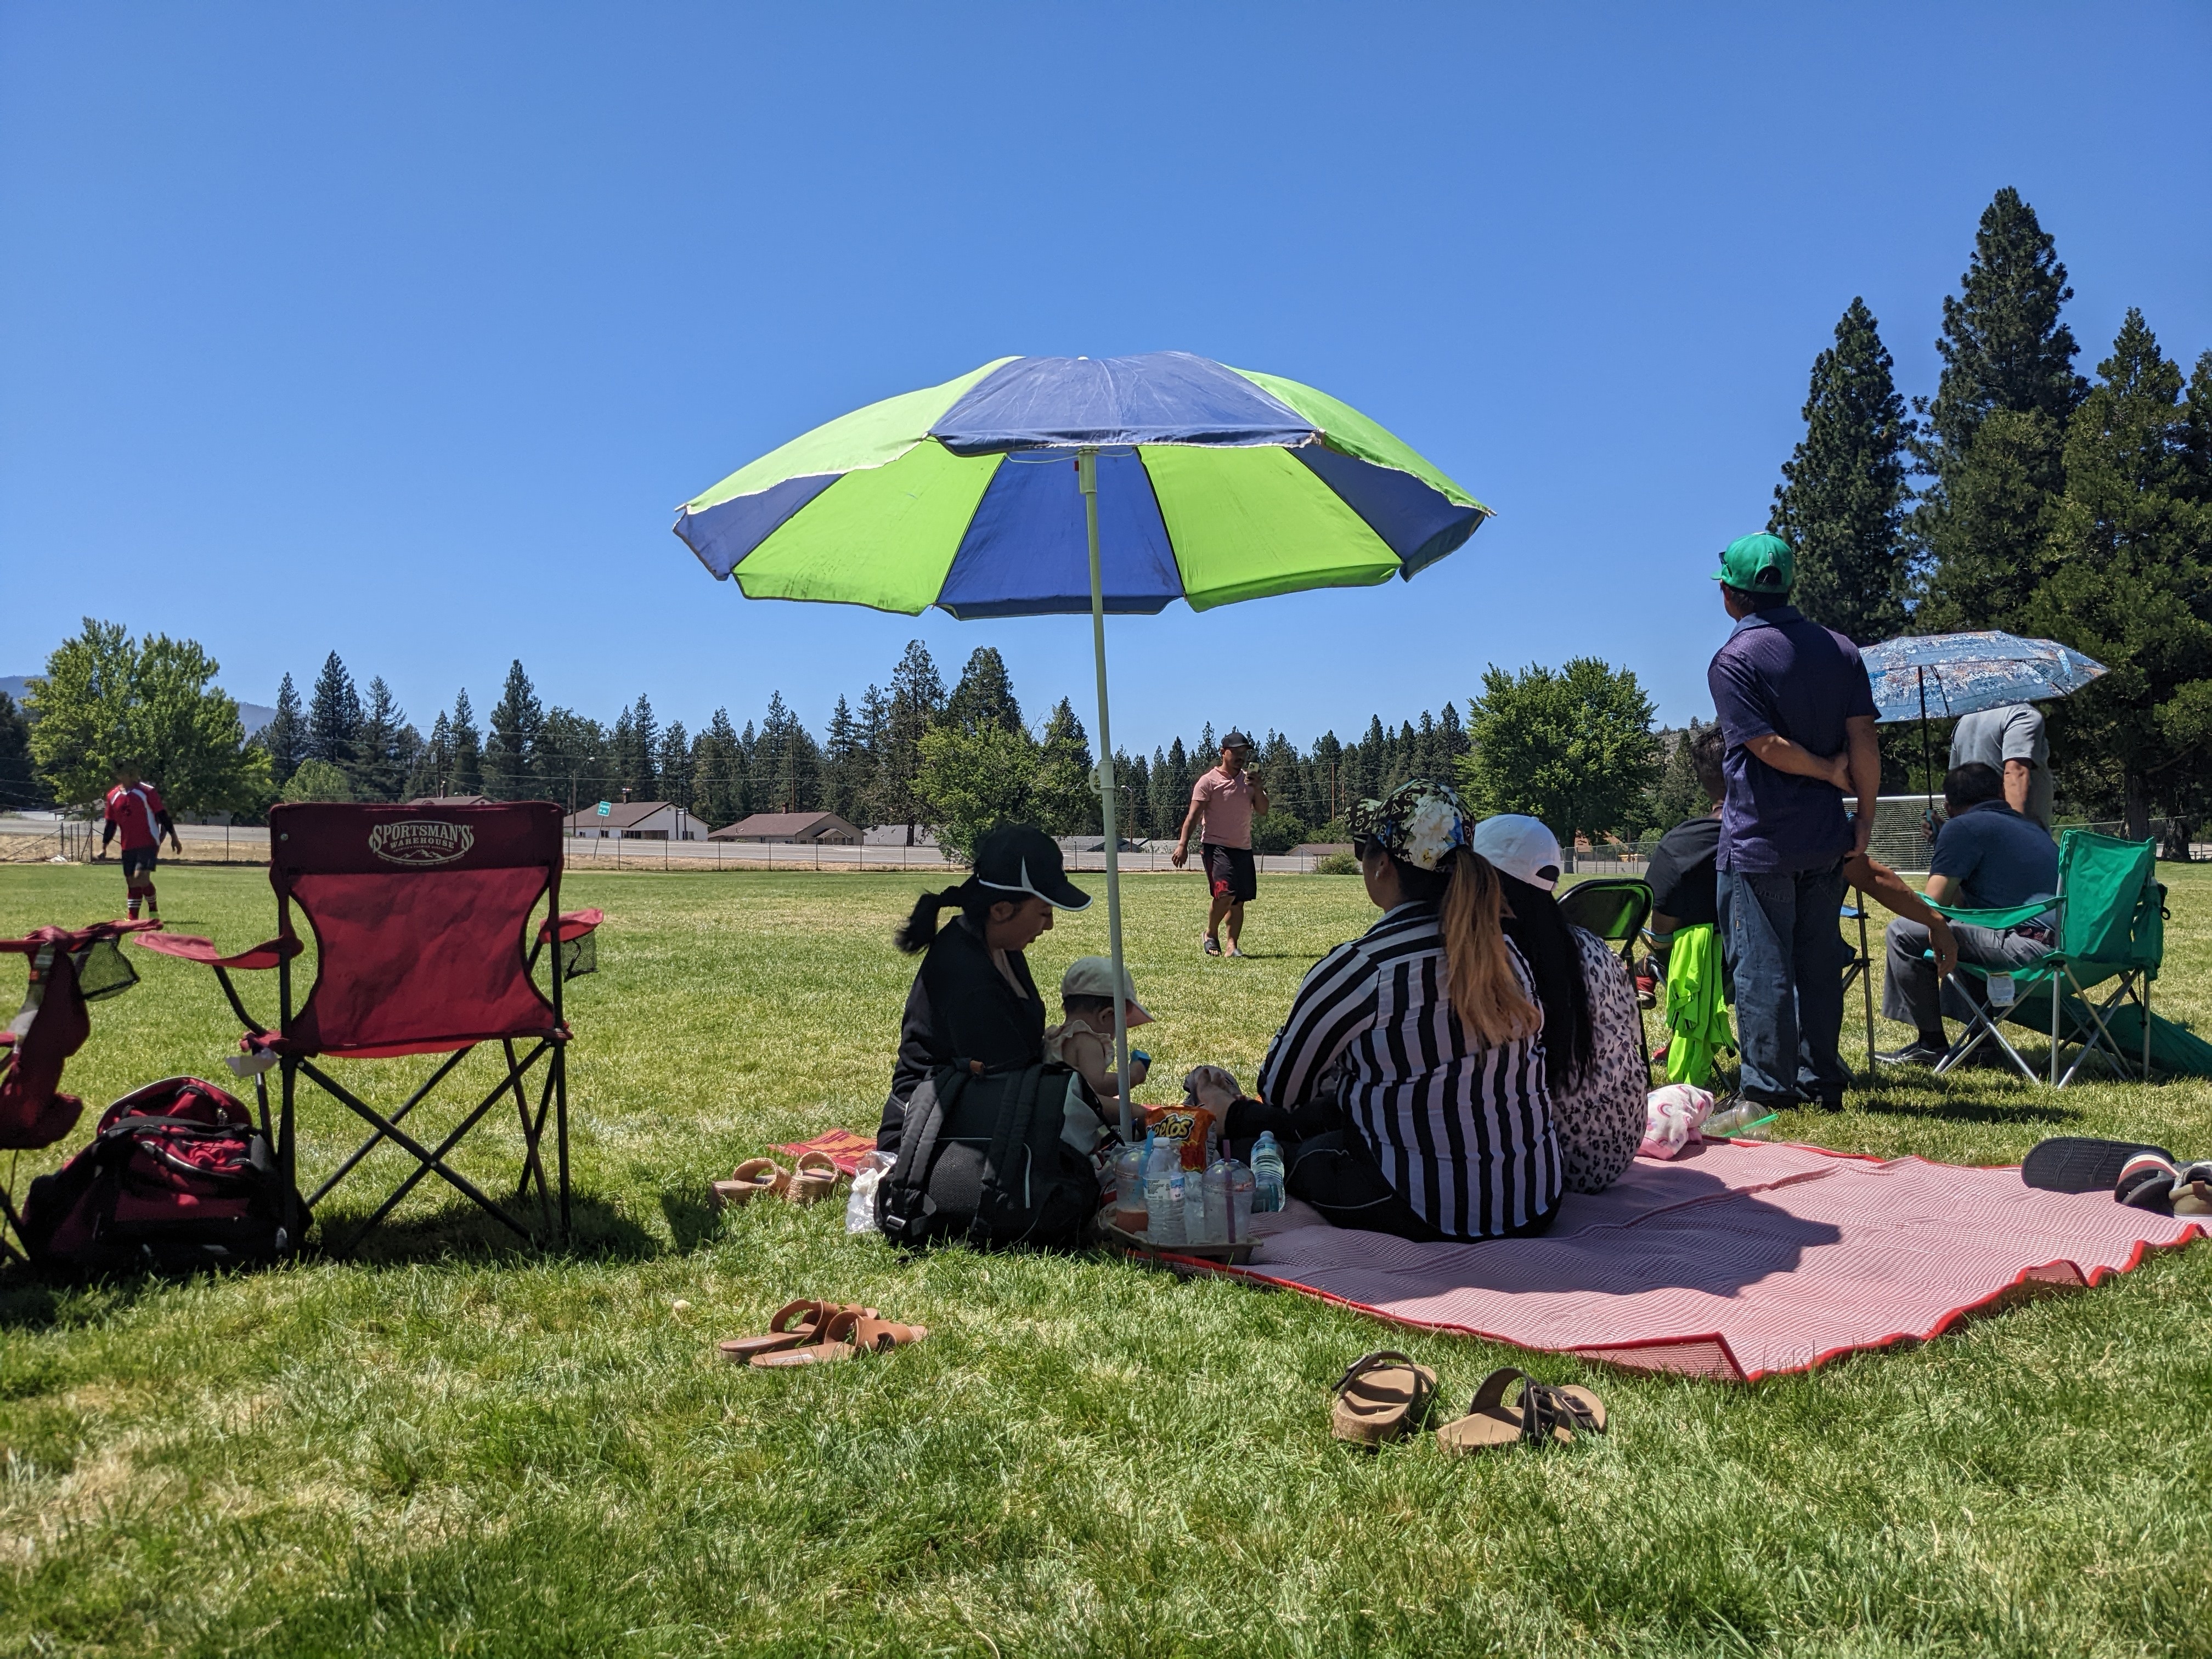 In July 2022, Hmong community members in Siskiyou County spend time together at a local picnic and soccer tournament.